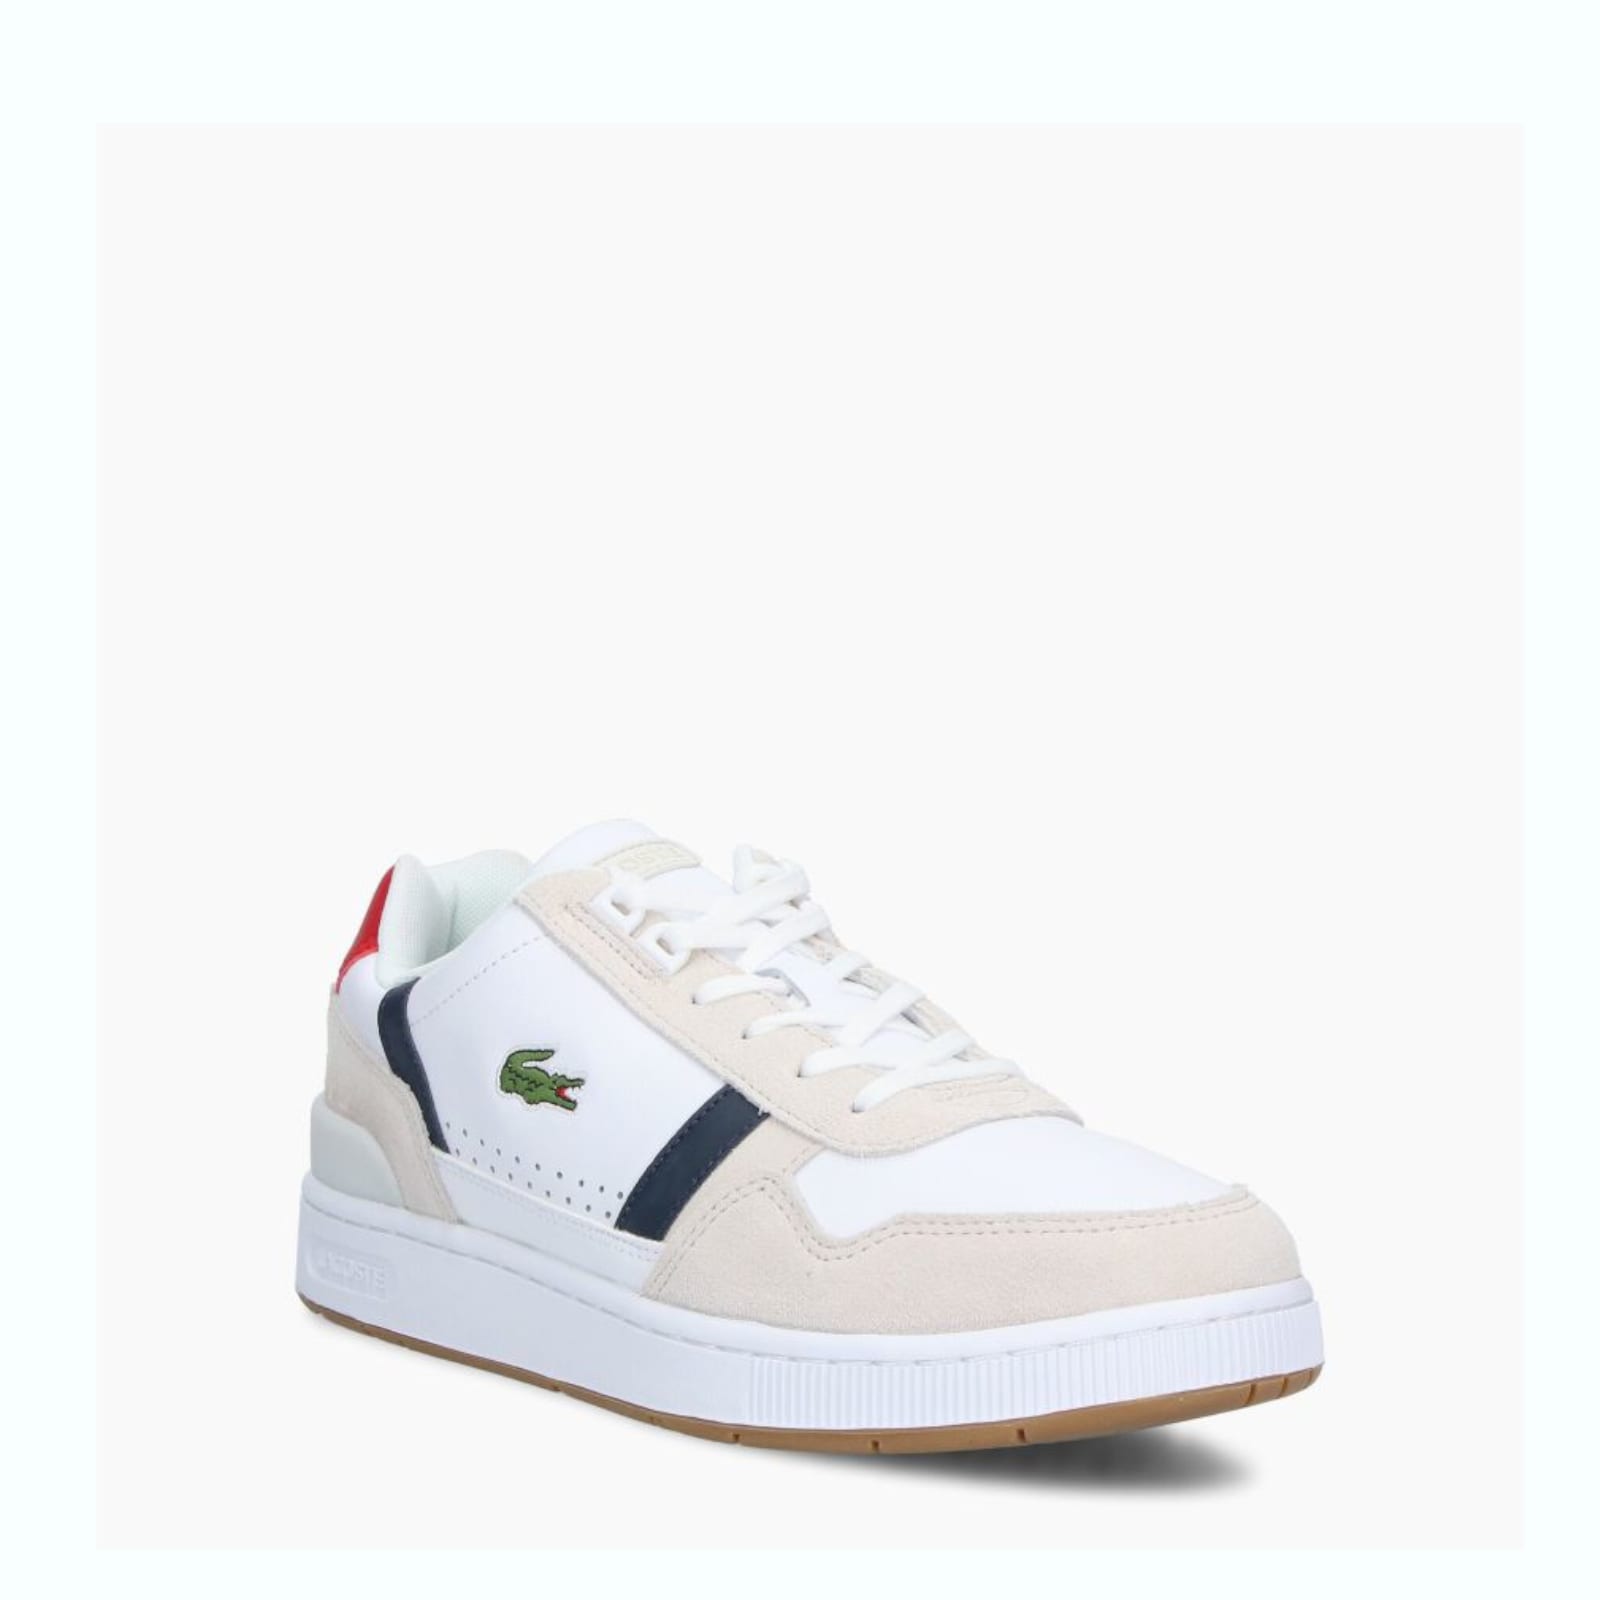 solely Angry behave Lacoste Sneakers Con Logo I00757407 | italist, ALWAYS LIKE A SALE